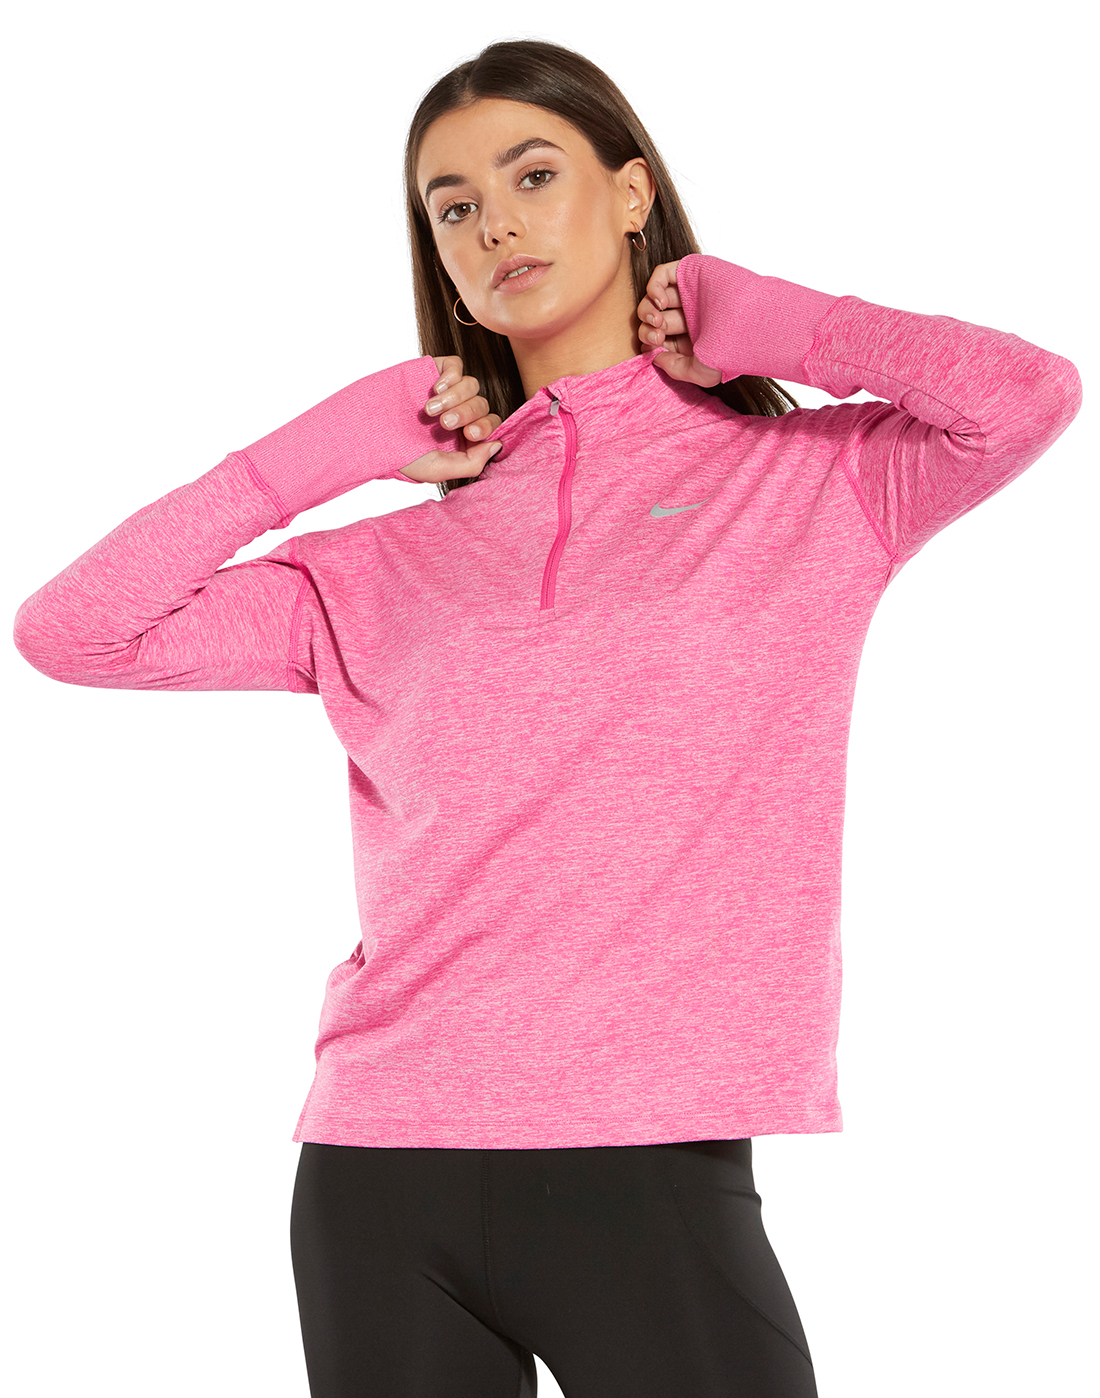 bright pink nike top